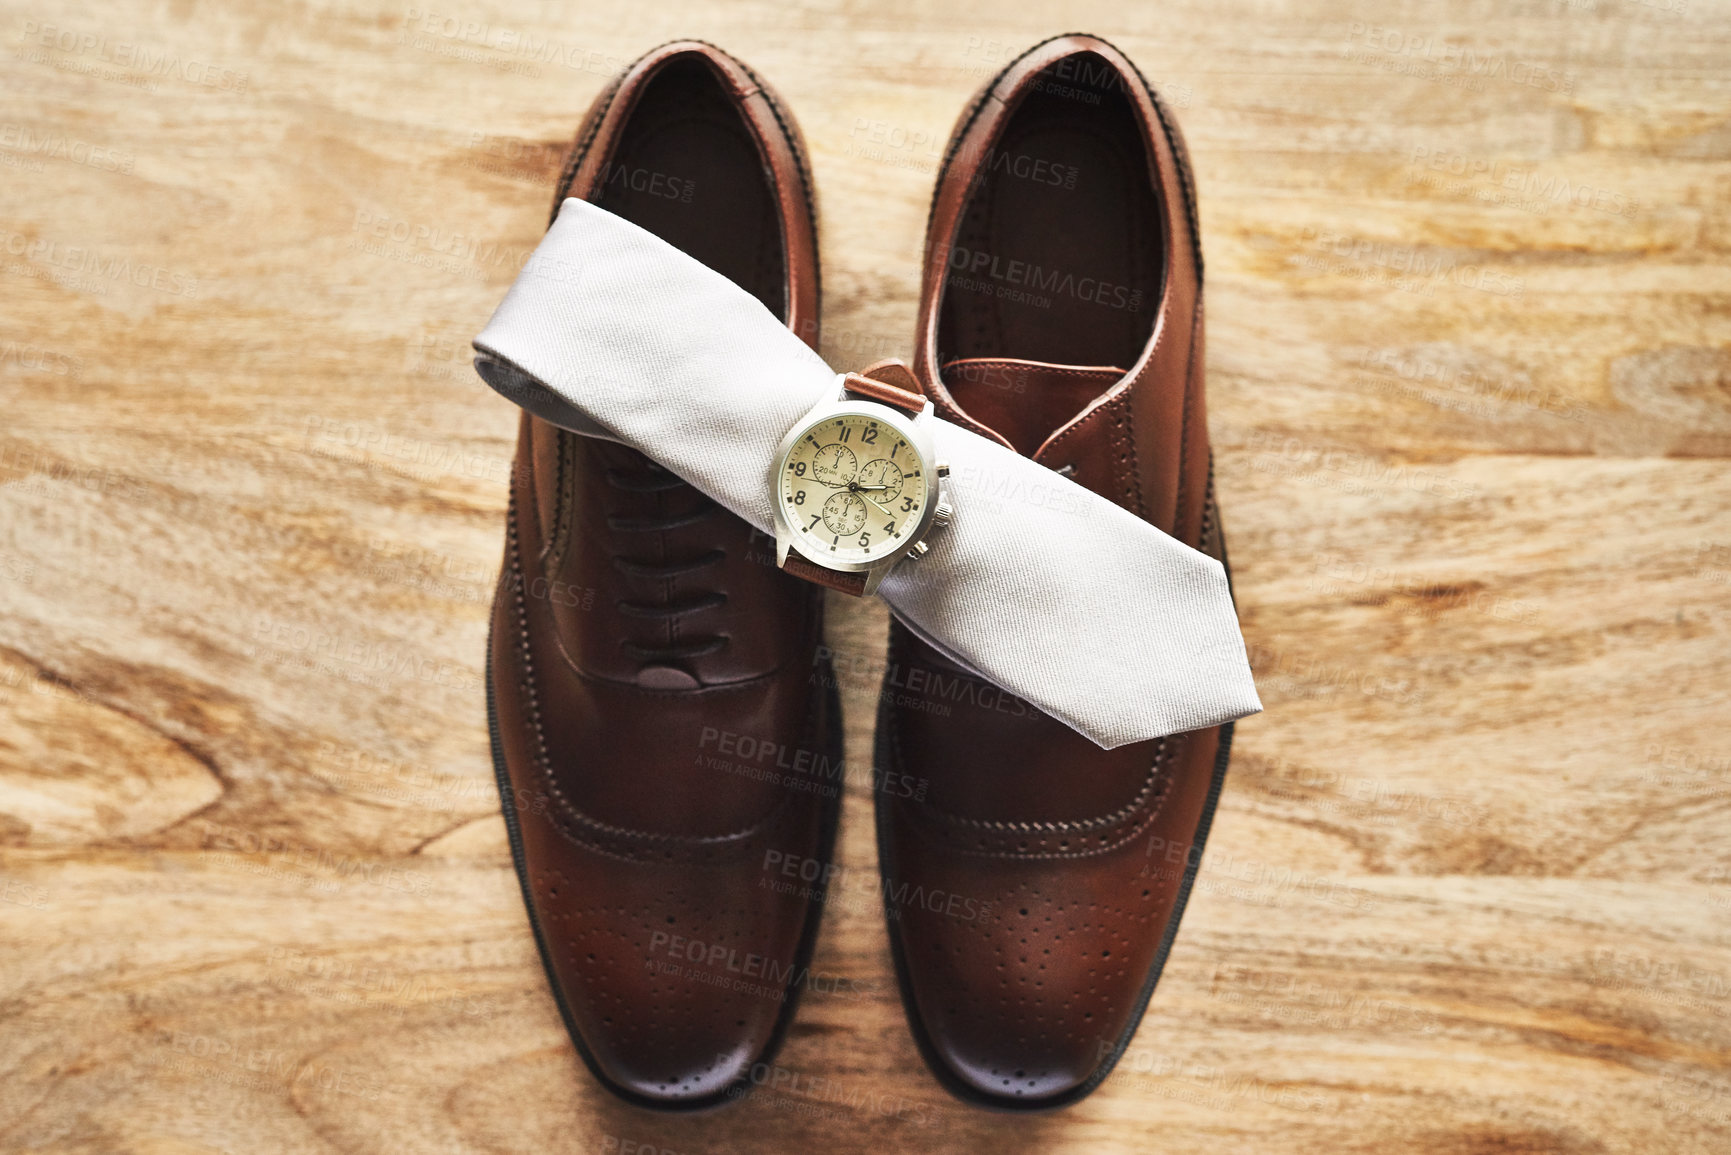 Buy stock photo Still life shot of a wristwatch and tie on top of formal shoes on a wooden surface